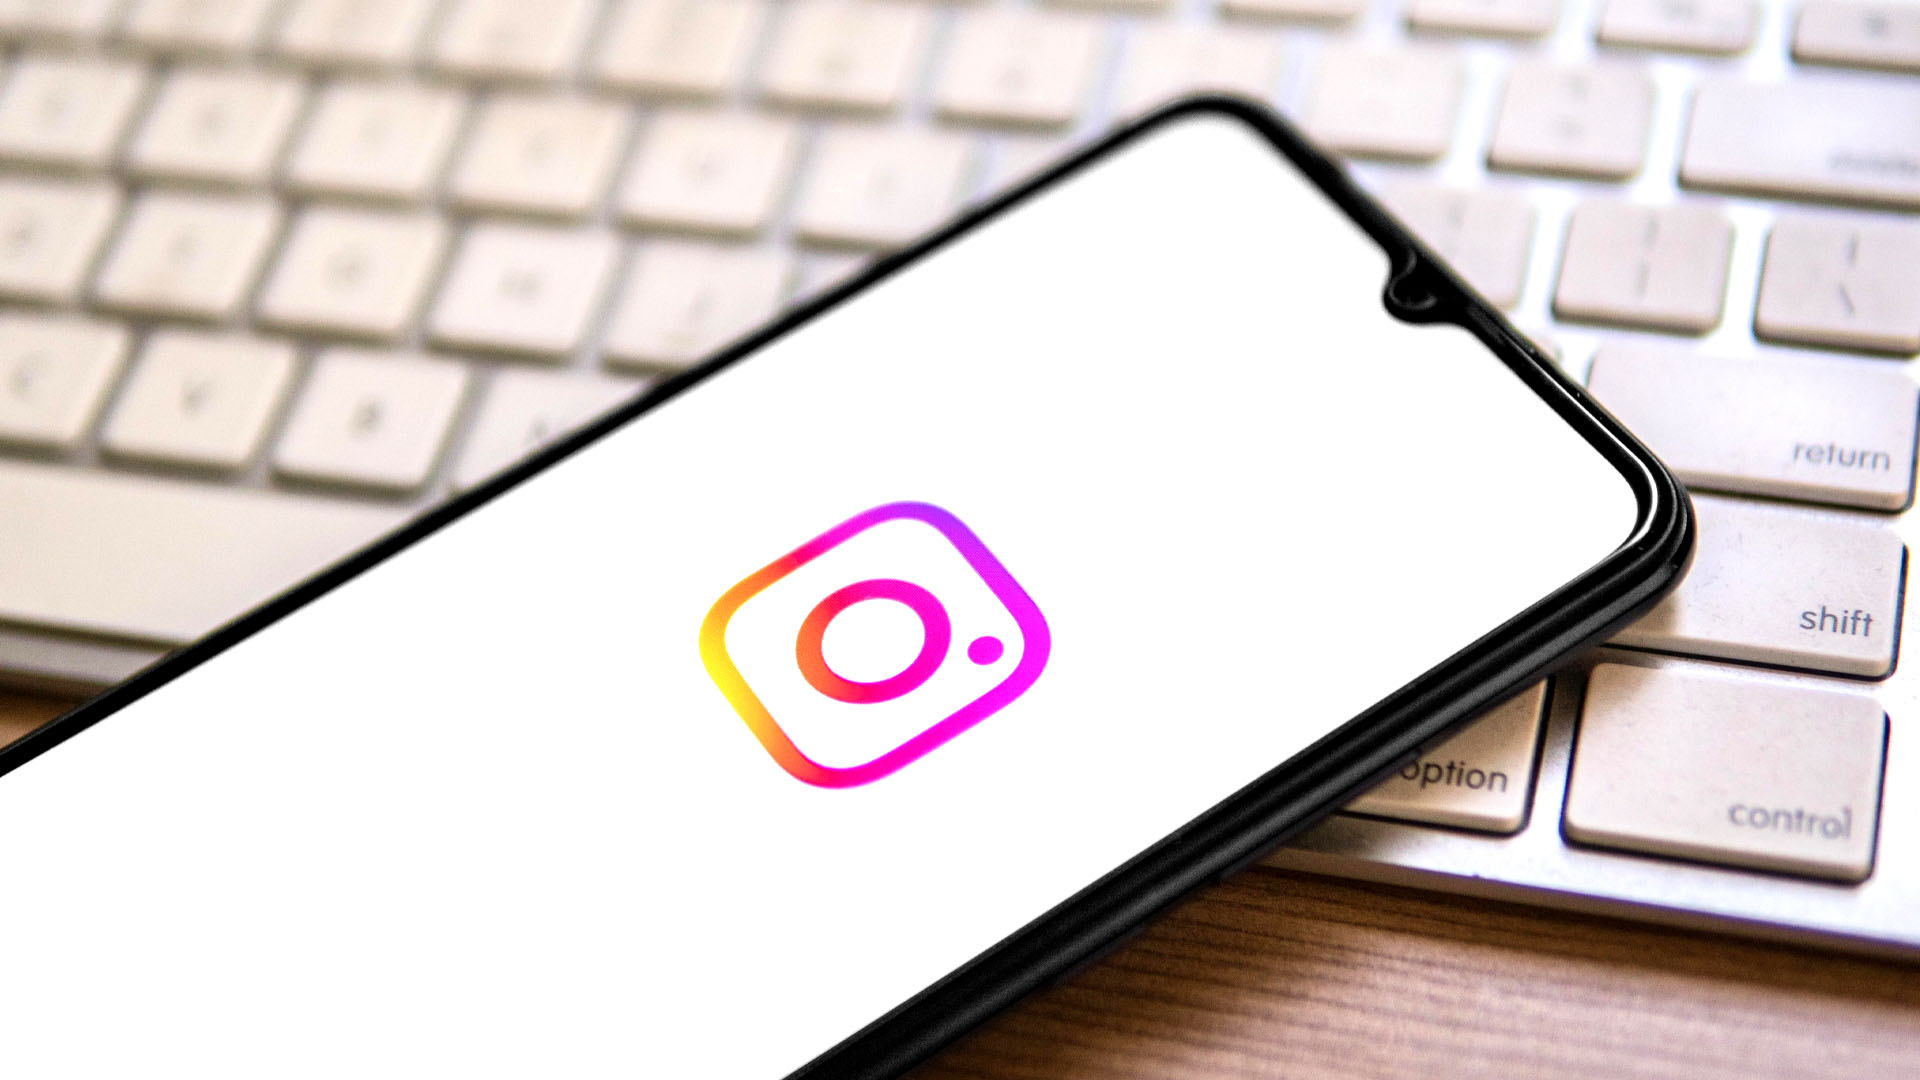 Instagram crashes: Tens of thousands of users around the world report that the app is down